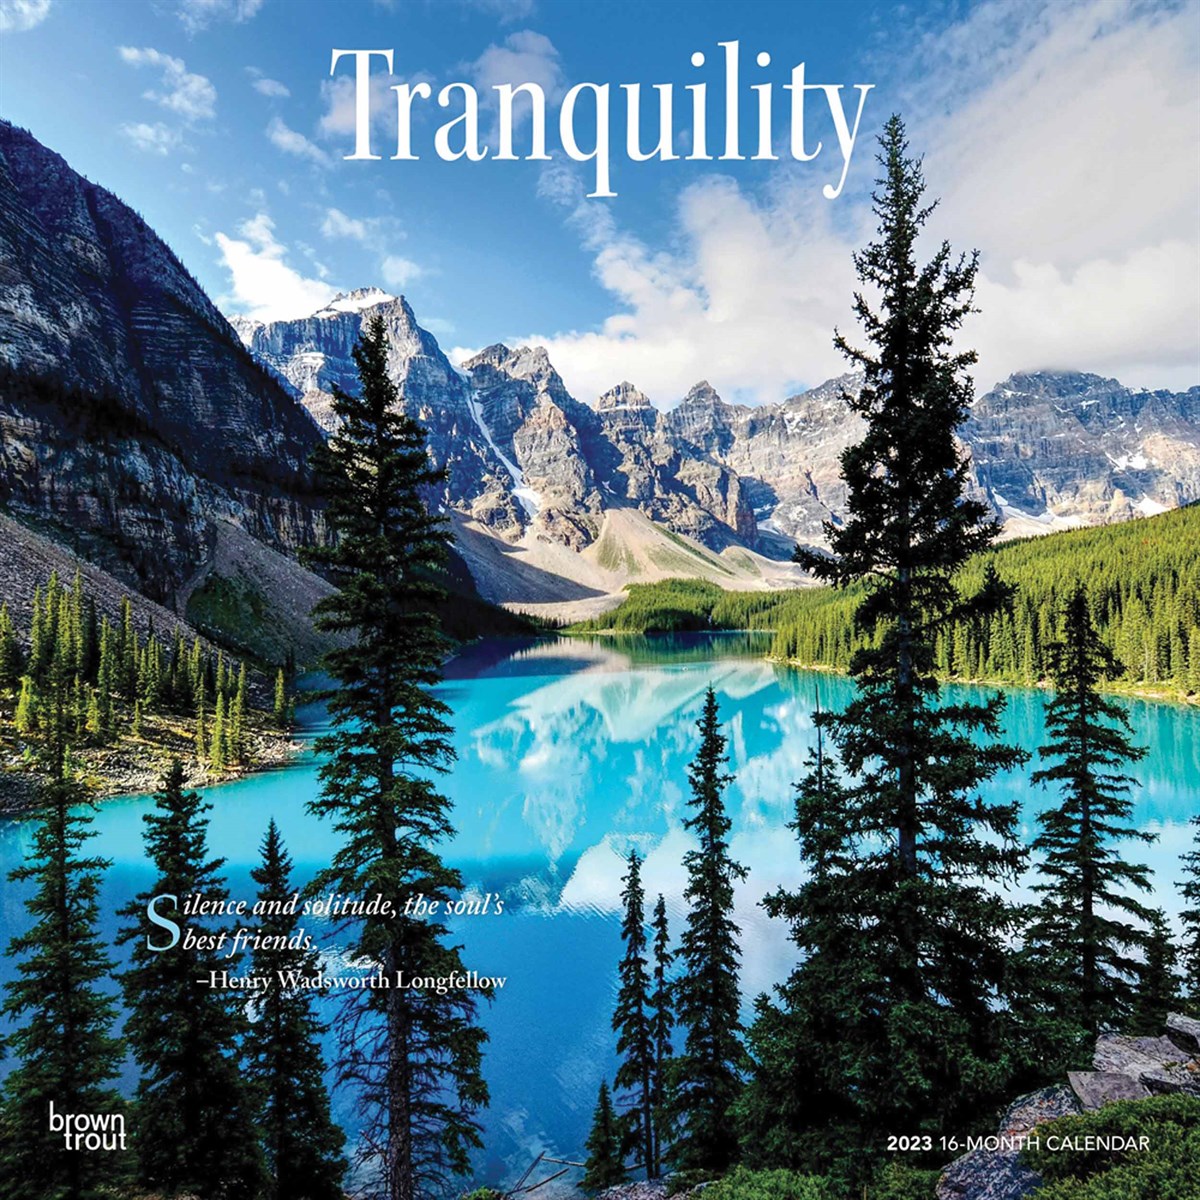 Tranquility 2023 Calendars